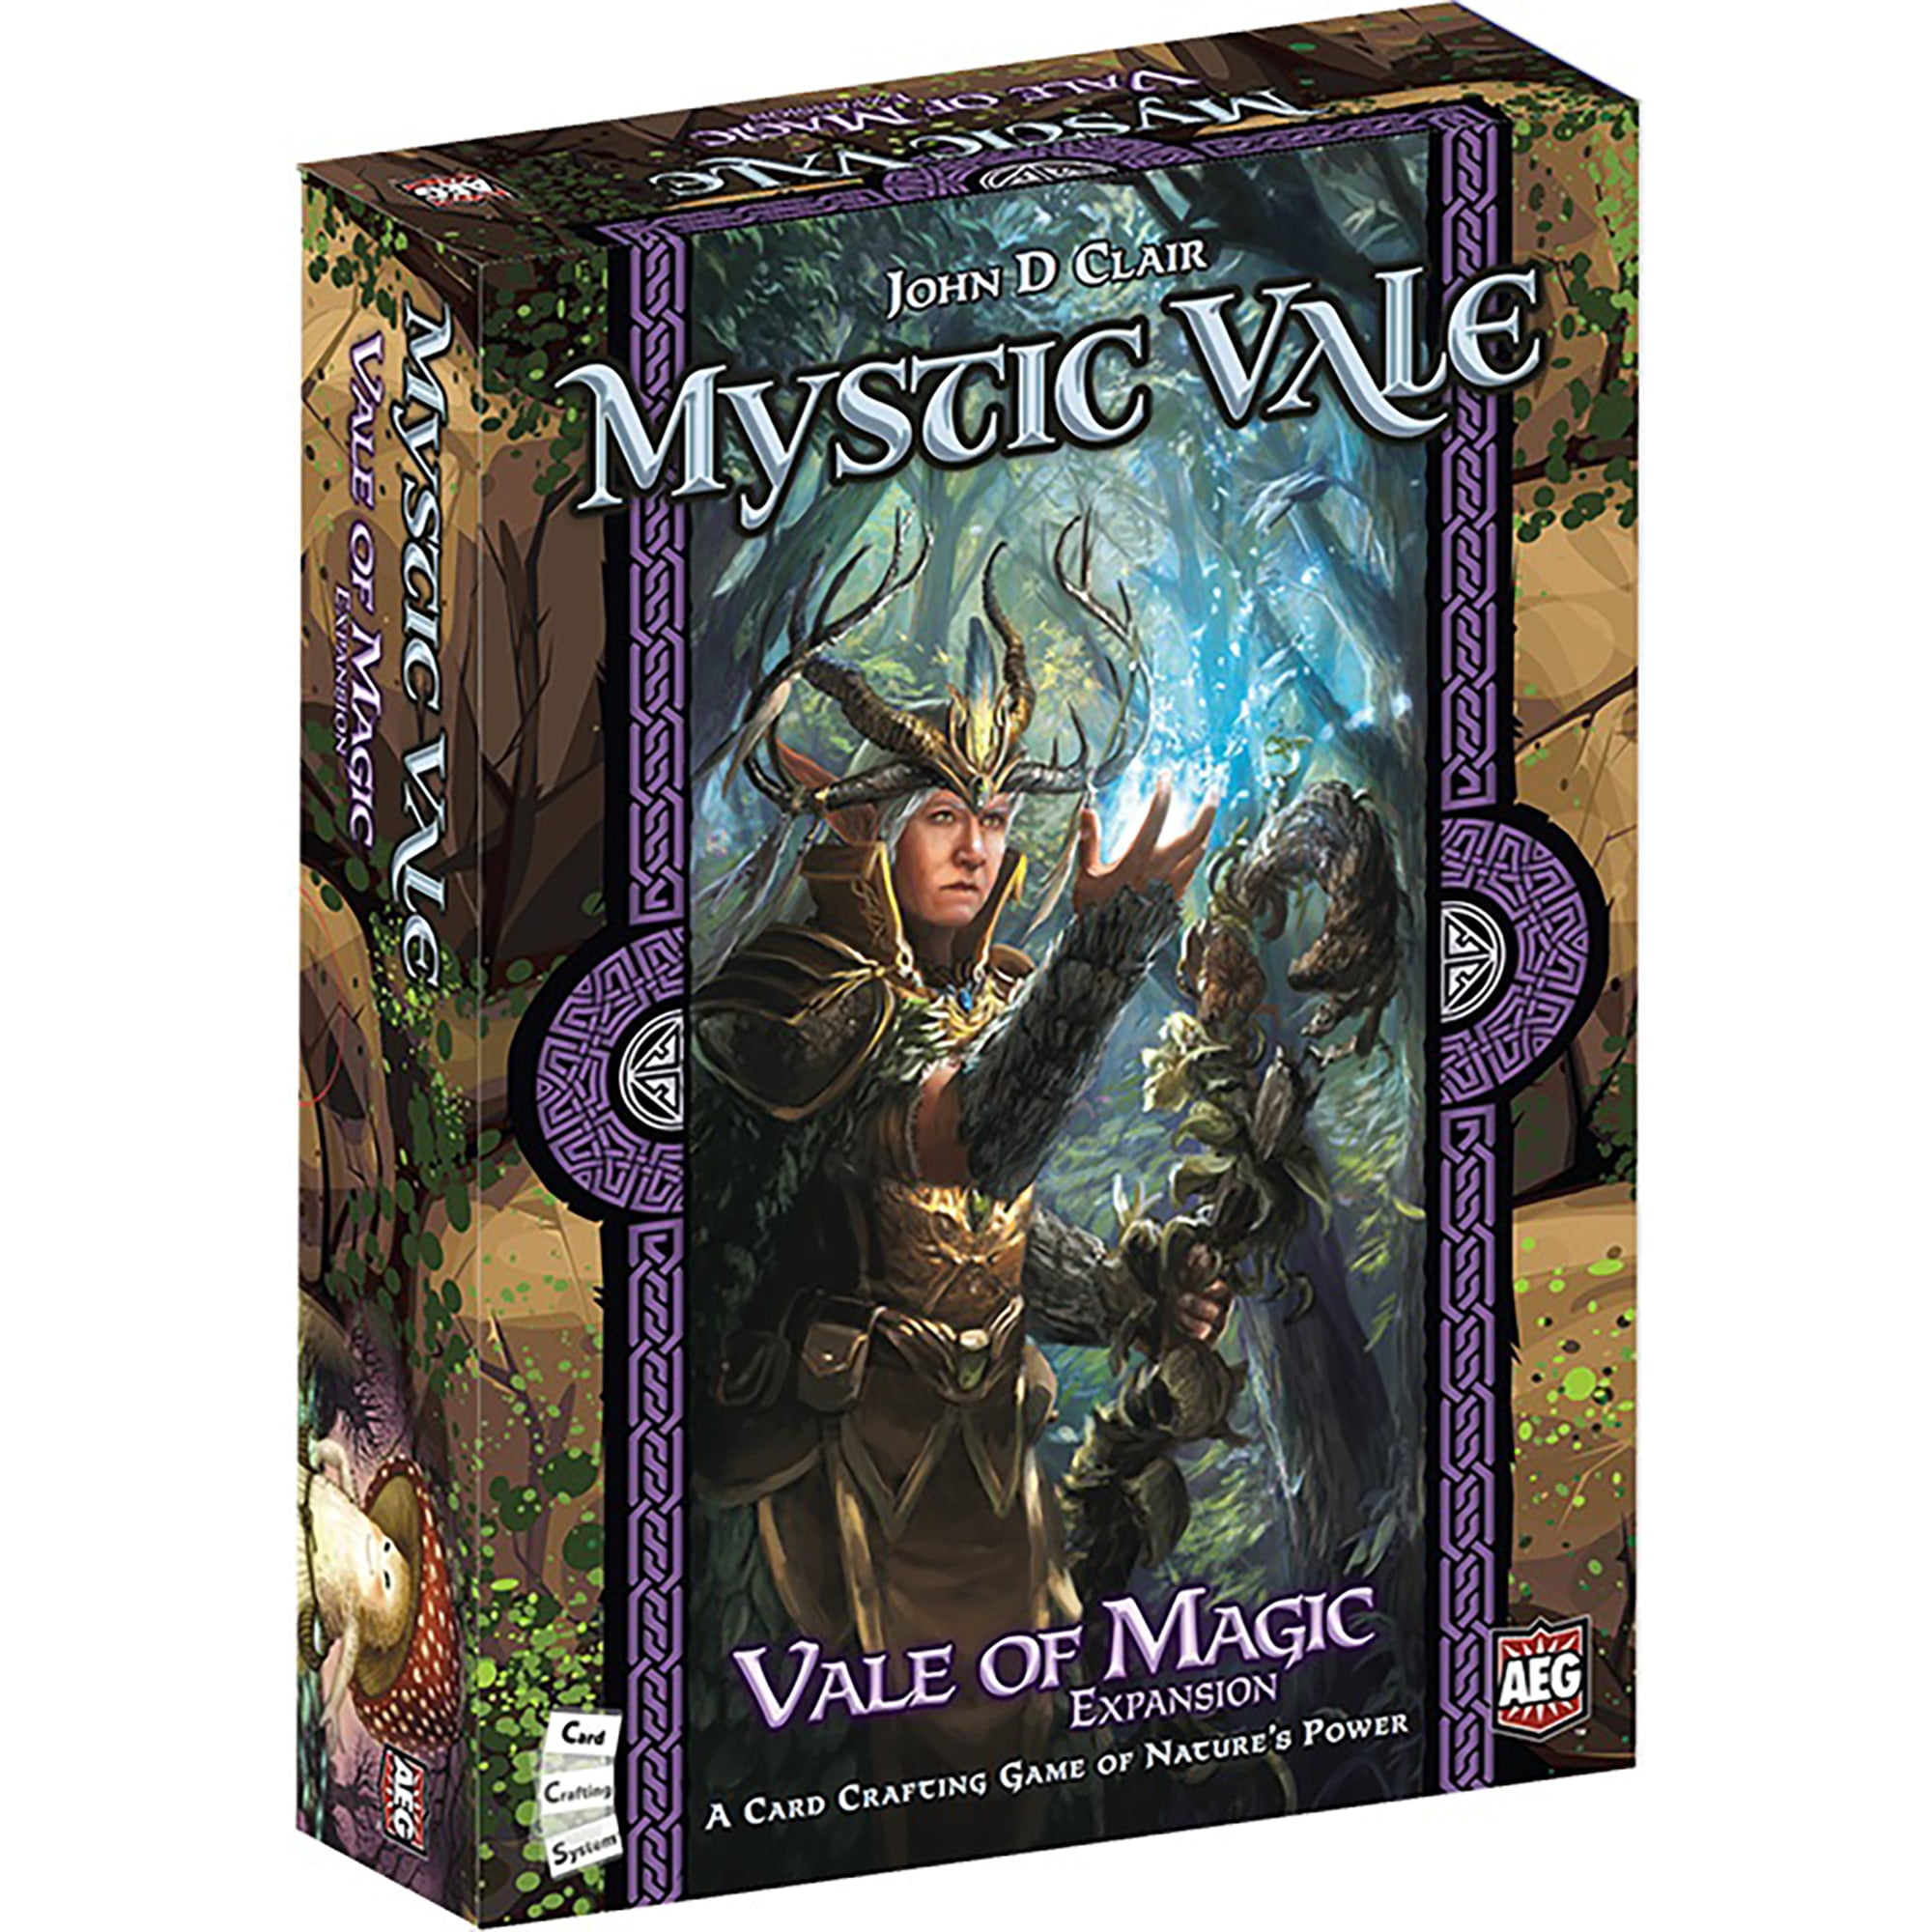 Picture of Alderac Entertainment Group AEG5864 Mystic Vale of Magic Card Game